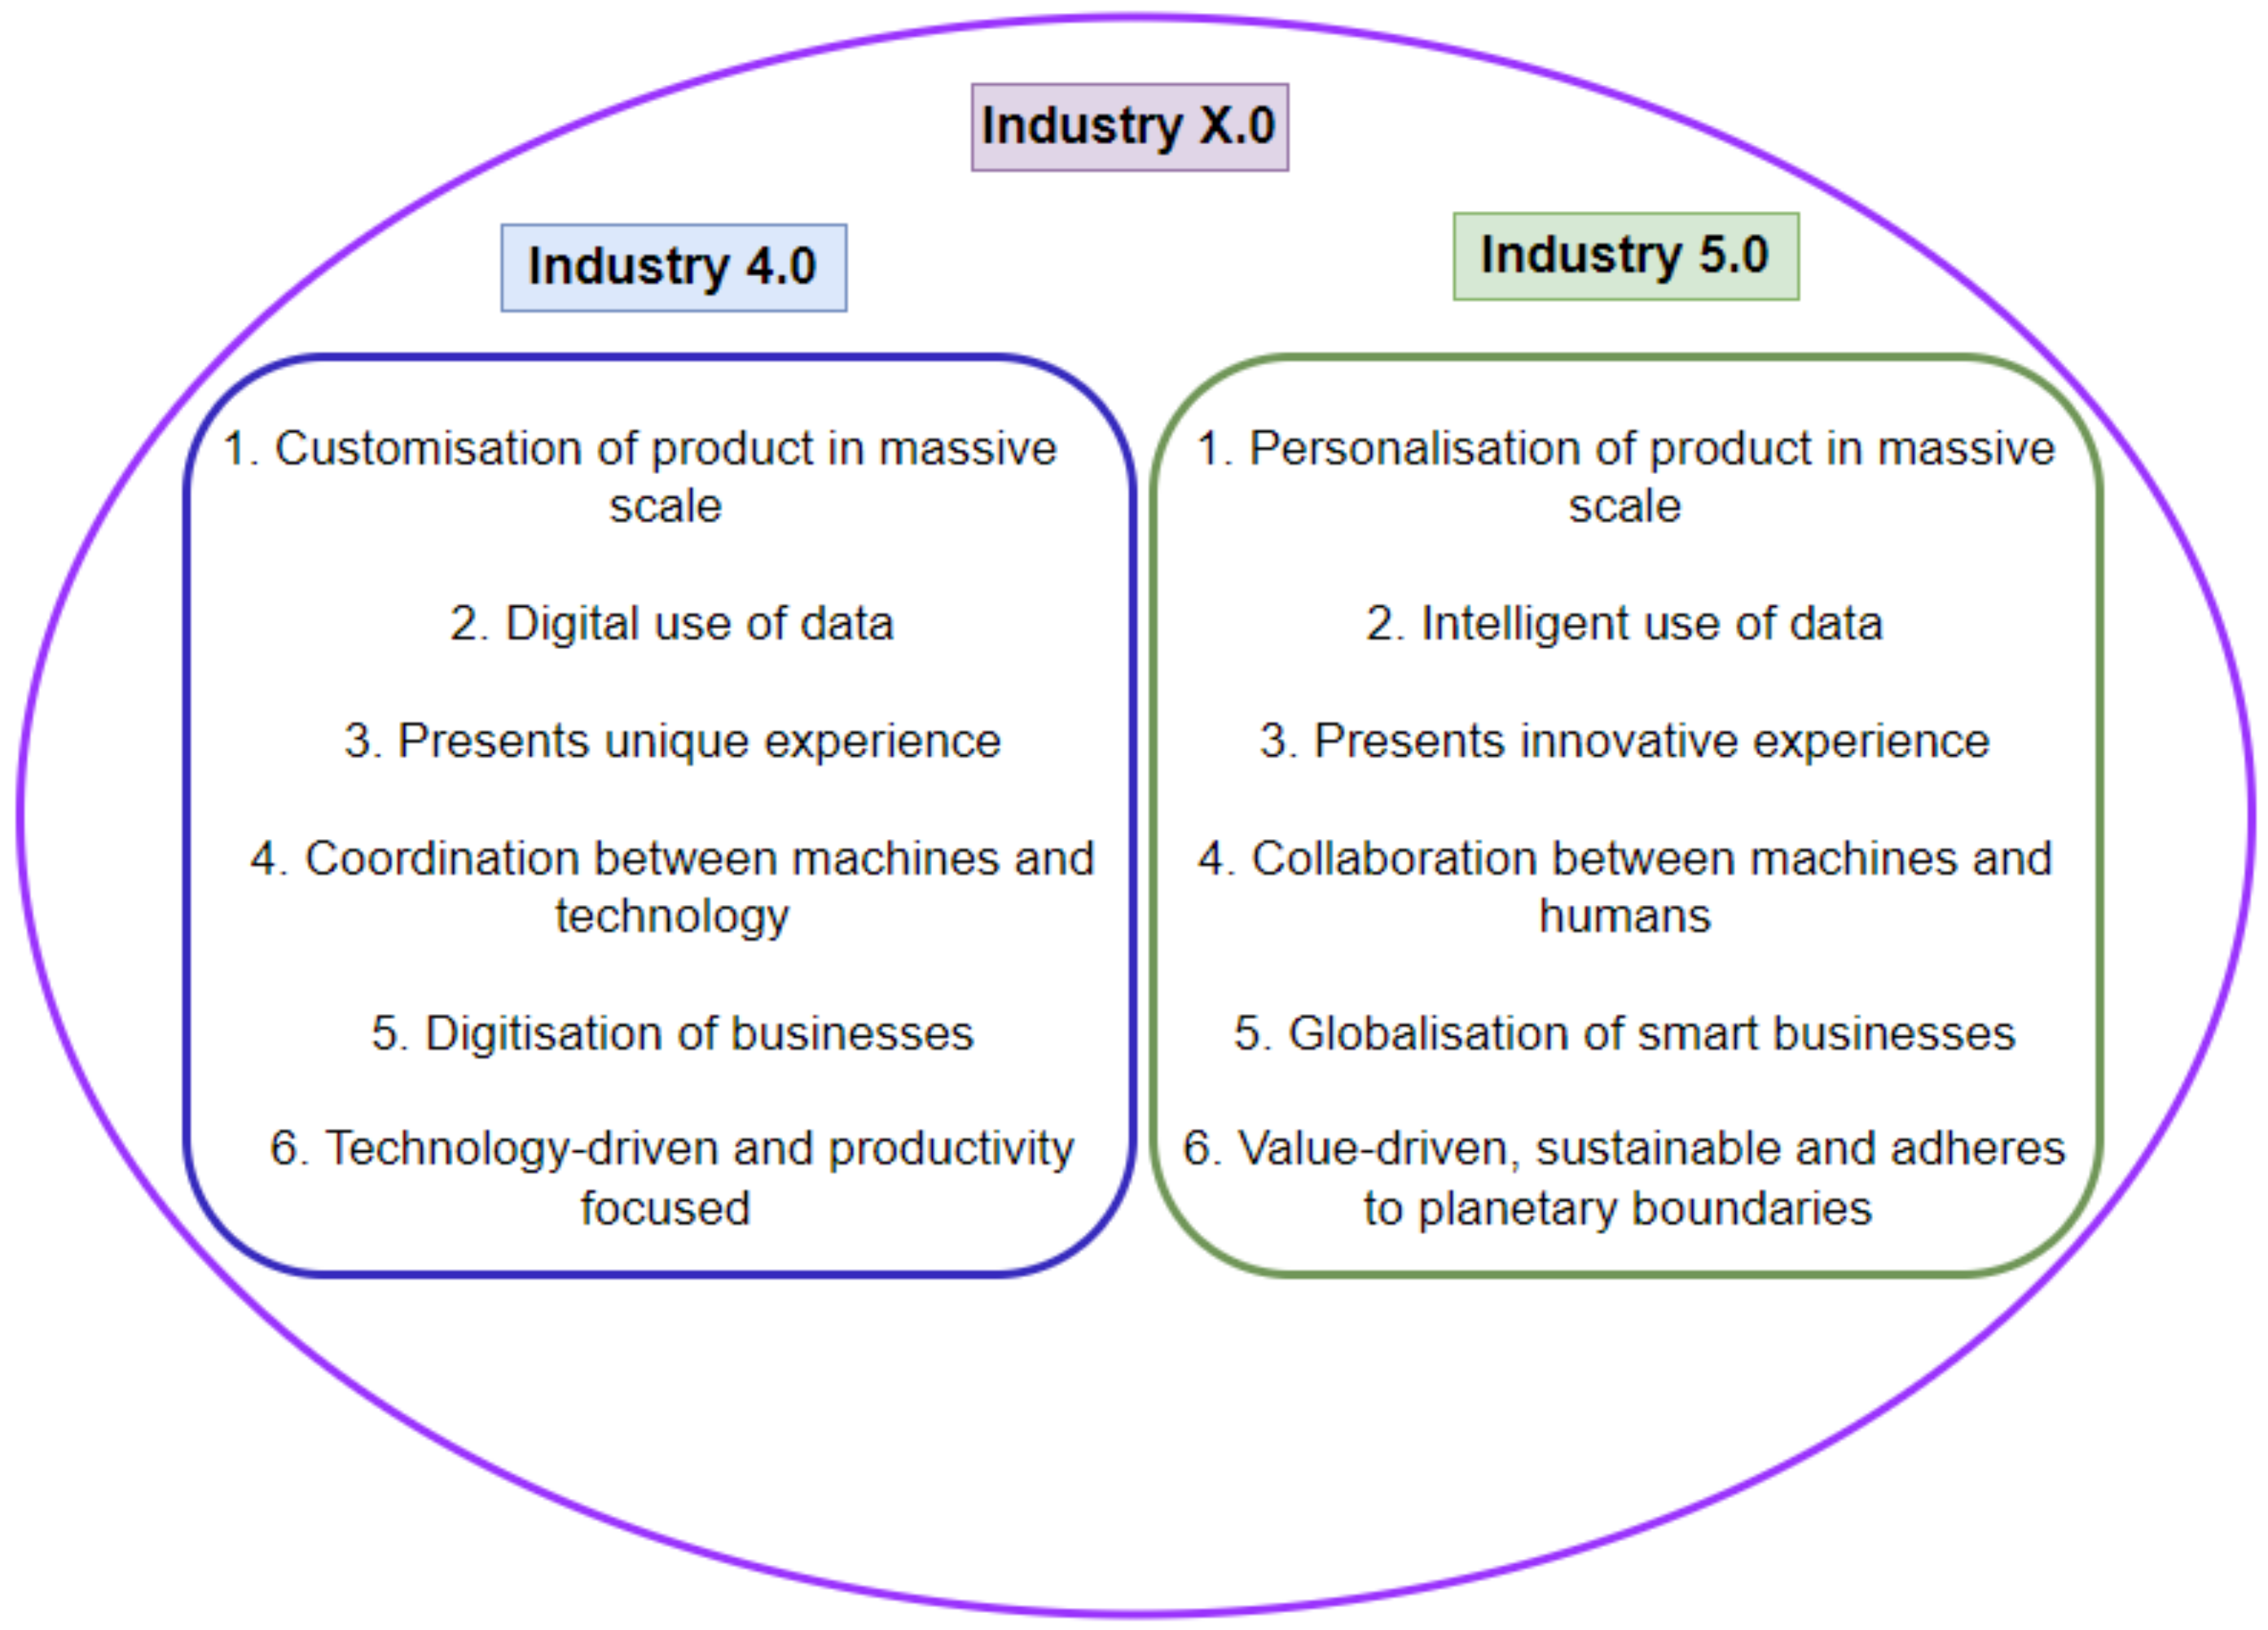 Industry 5.0 vs Industry 4.0: What are the differences?